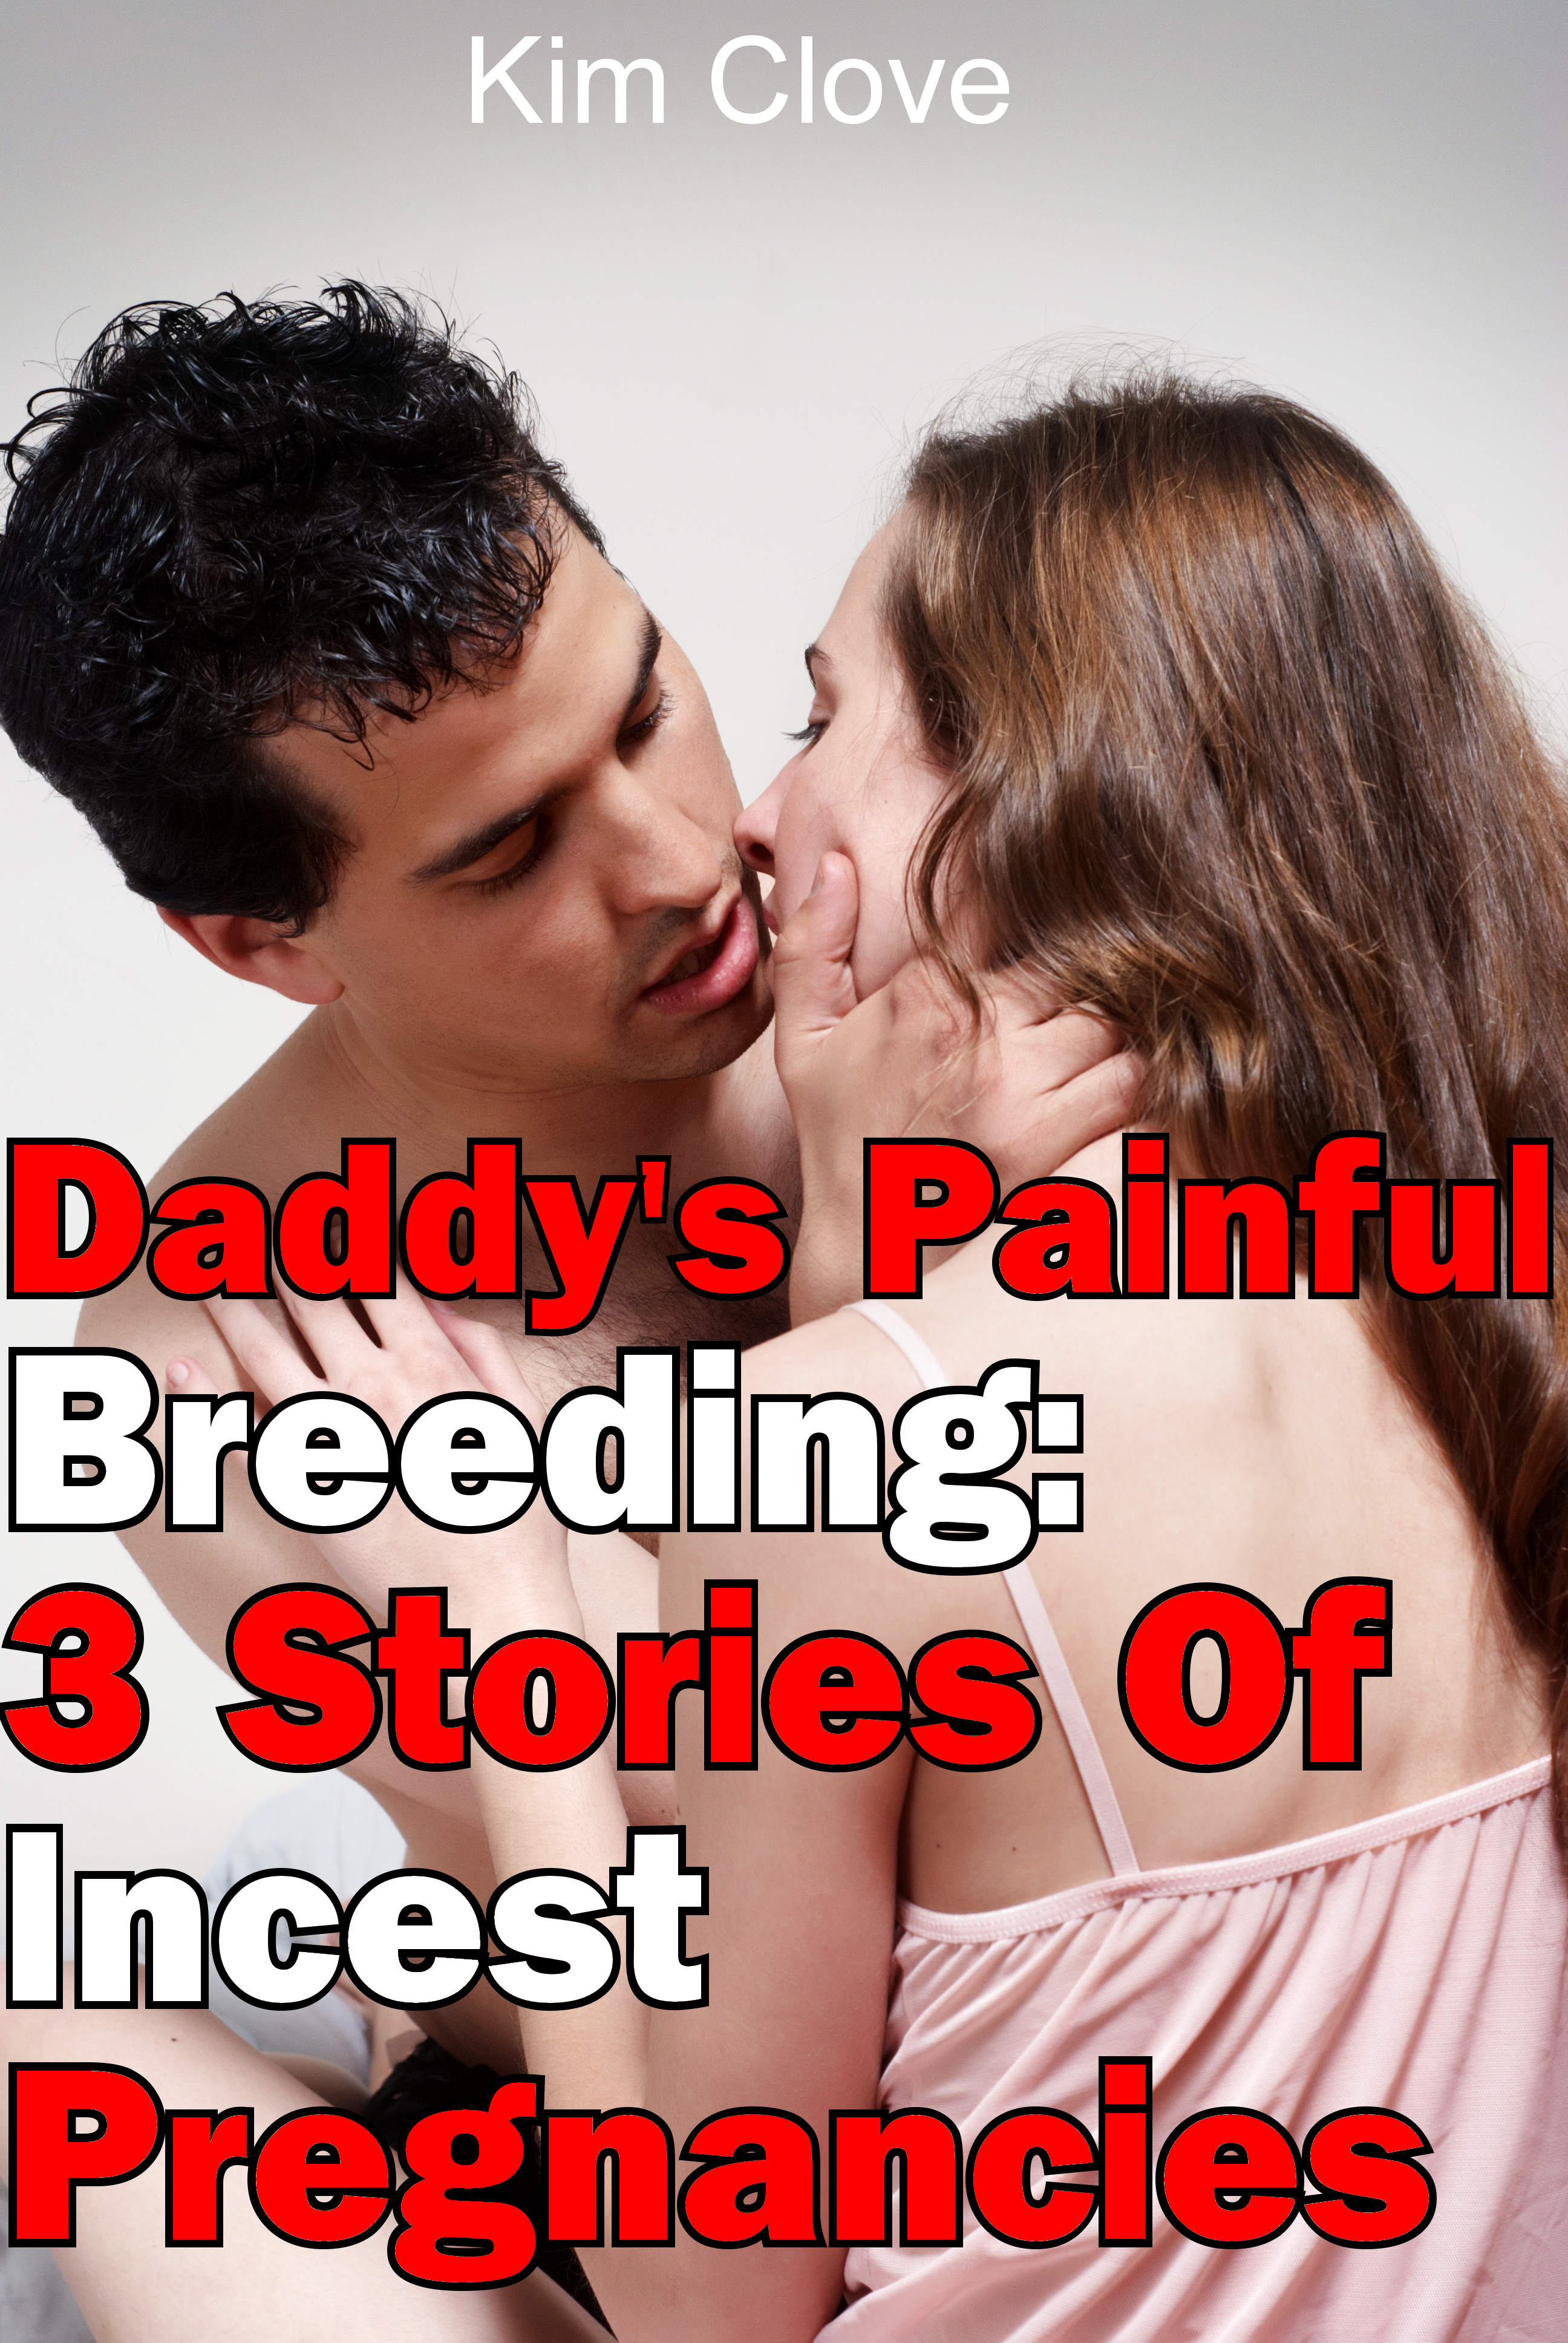 Daddys Cock Stories